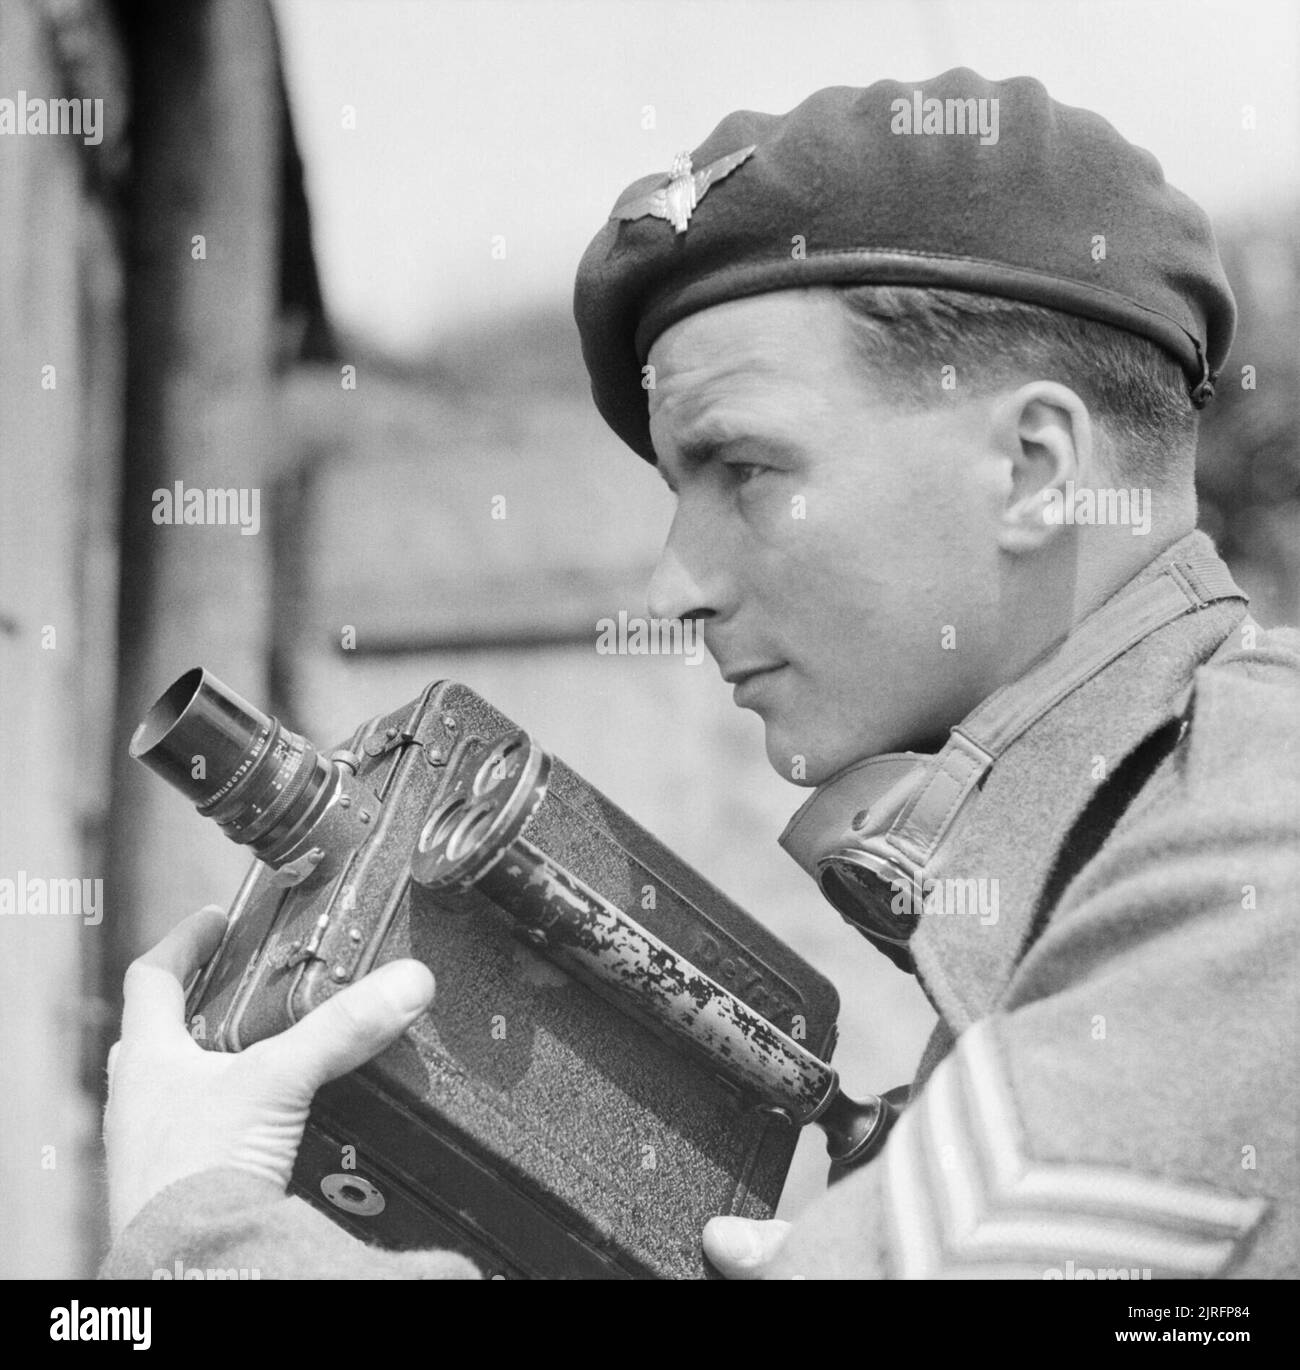 The British Army Film and Photographic Unit 1941 - 1947 Sgt Harry Oakes, cine cameraman and photographer with No 5 Army Film and Photographic Unit, poses with his cine camera for a final picture before leaving the North West European theatre in June 1945. After service with the Royal Corps of Signals, Harry Oakes volunteered for the AFPU and served with No 5 Section in North West Europe from 1944 - 1945. He then served in South East Asia and then returned to cover the Allied Occupation of Vienna, December 1946. Equally at home using a cine or still photograph camera, he was one of the AFPU tea Stock Photo